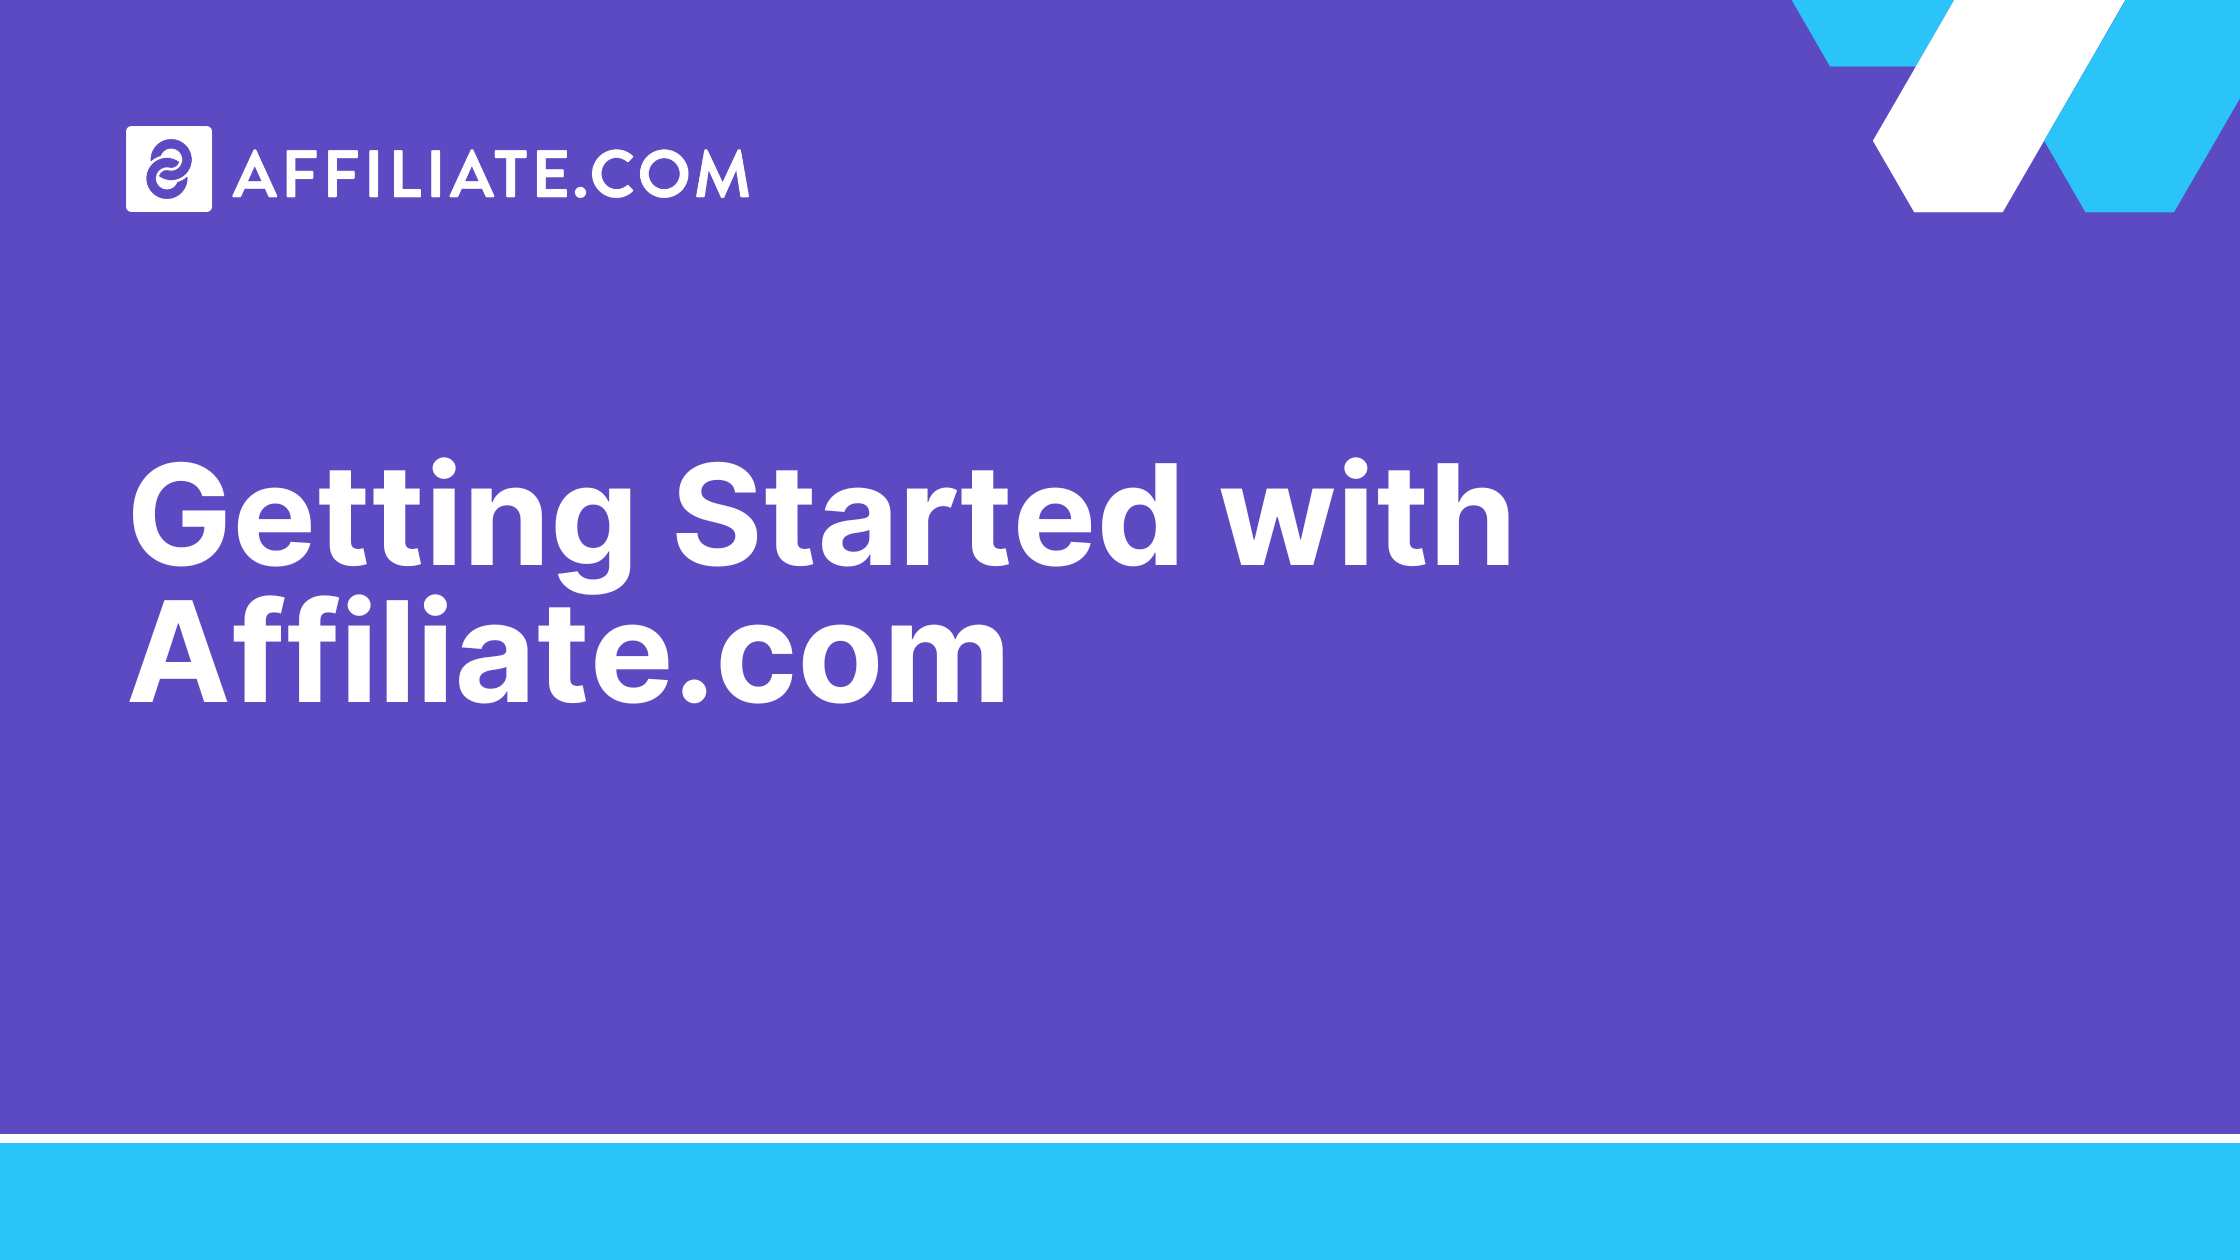 Getting Started with Affiliate.com